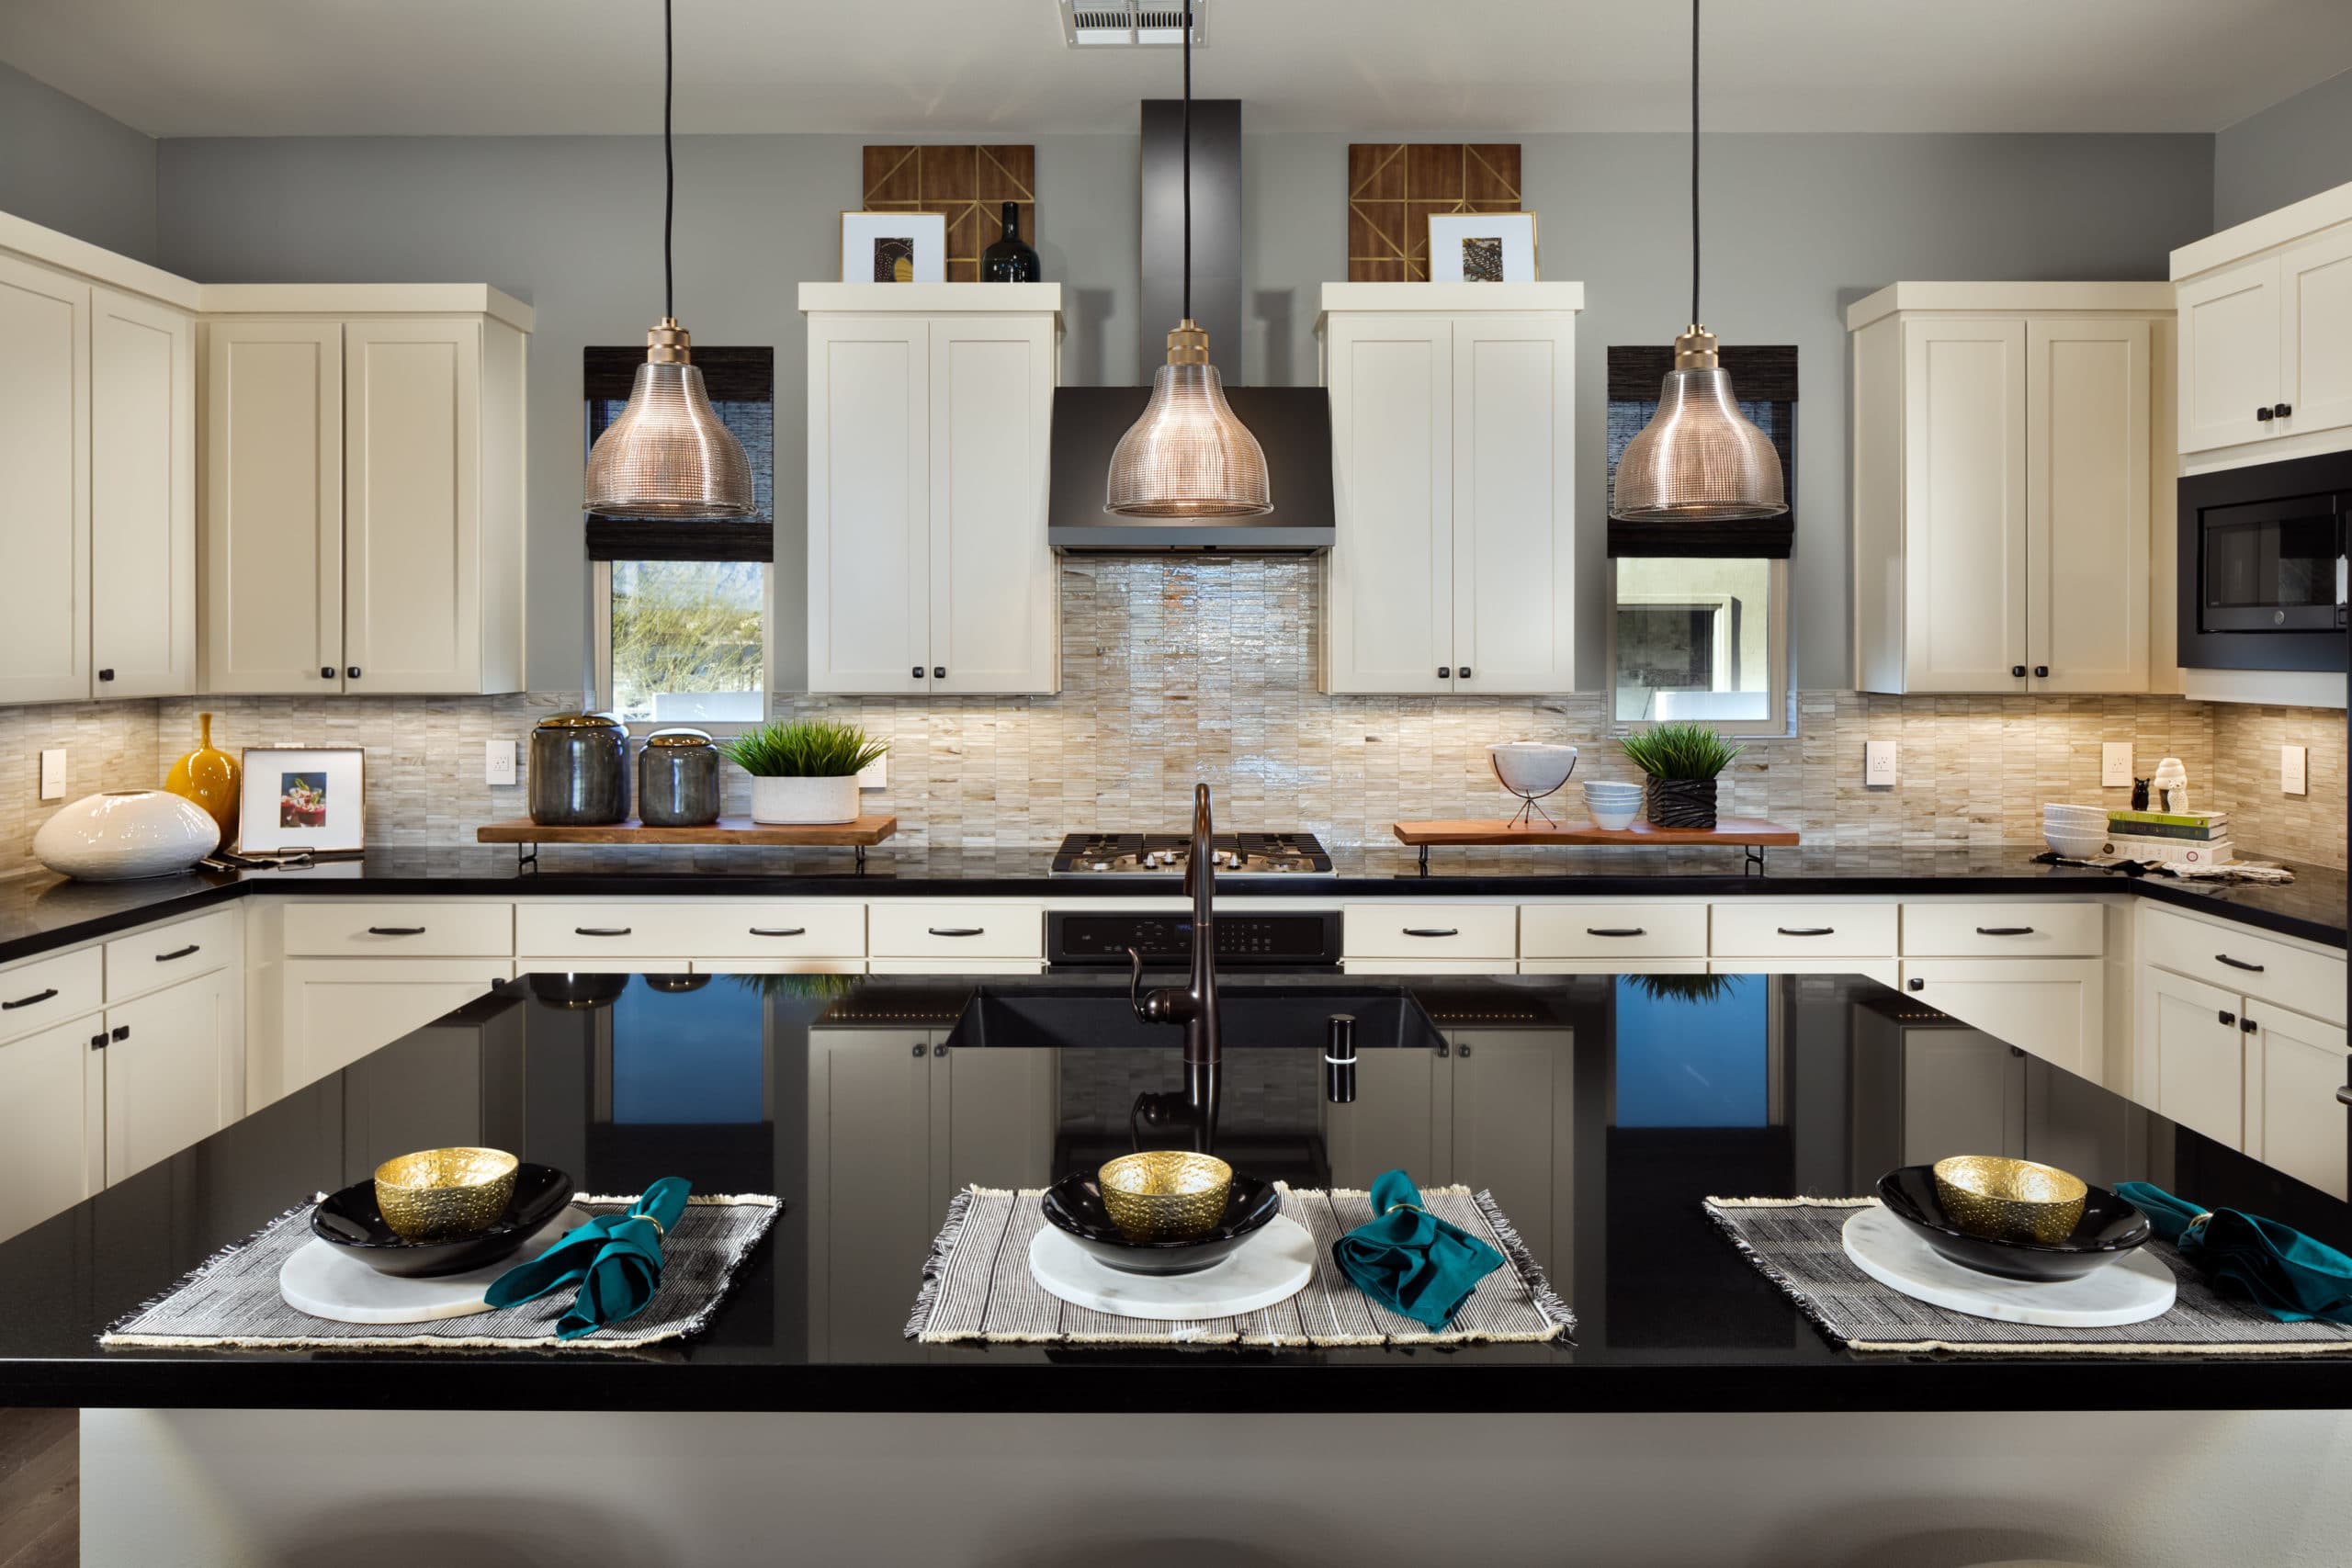 Kitchen in Splendor Model in Luxe Collection in Trilogy by Shea Homes in South Square in Summerlin